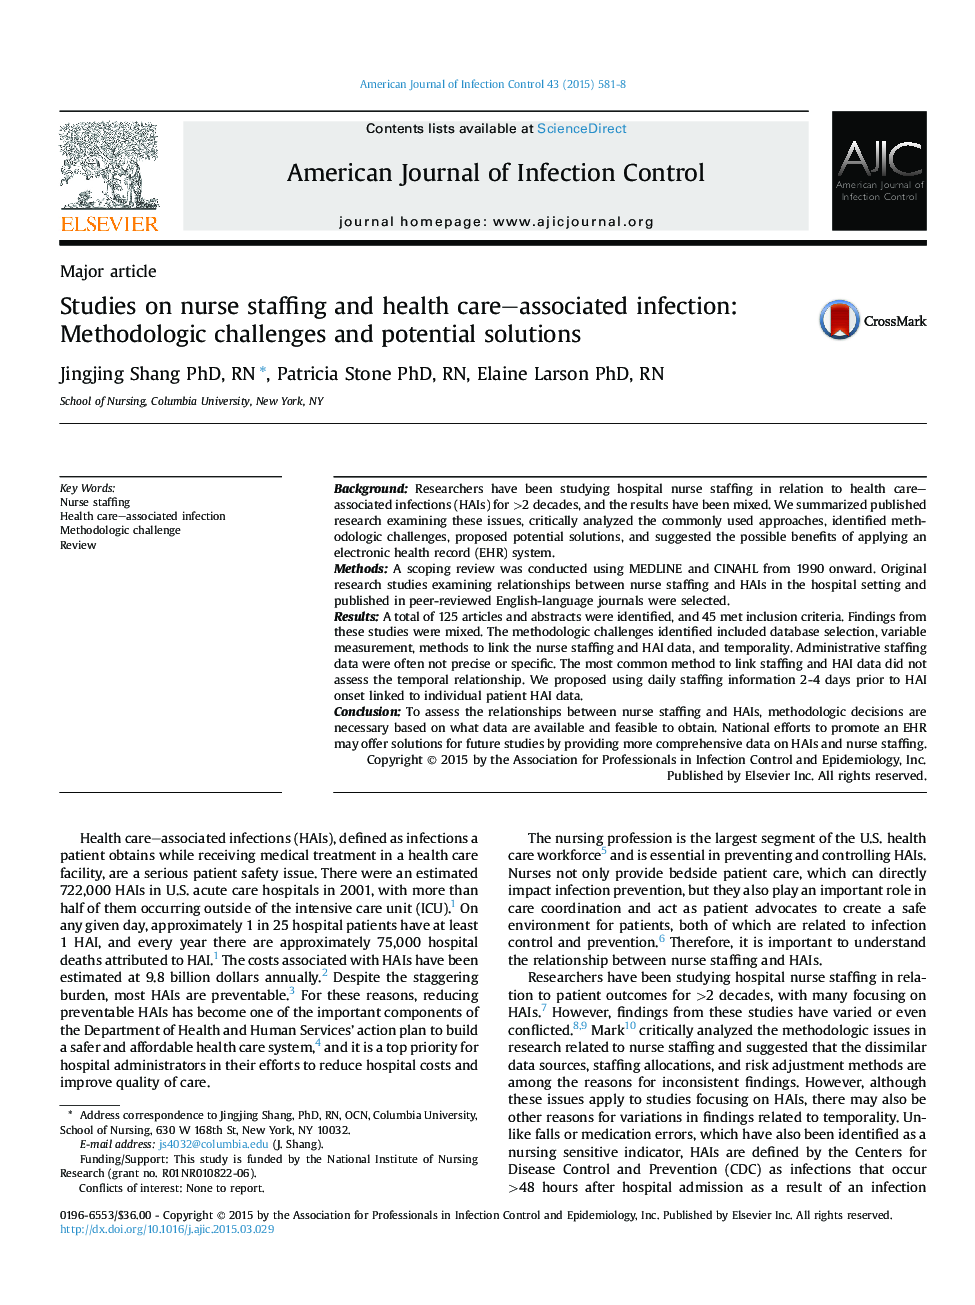 Major articleStudies on nurse staffing and health care-associated infection: Methodologic challenges and potential solutions